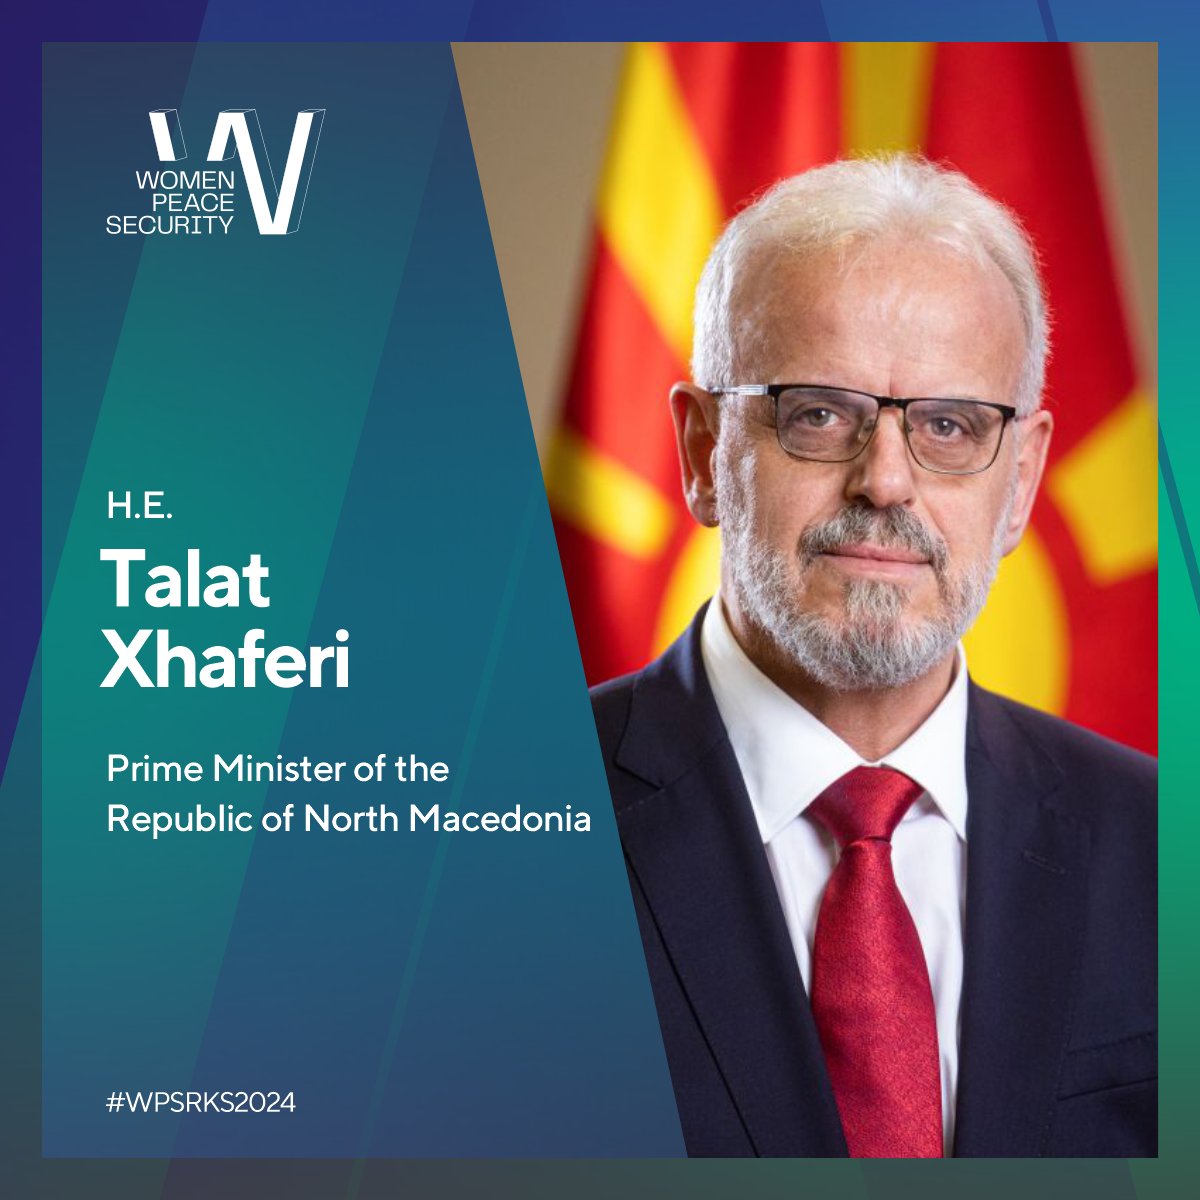 Delighted to welcome H.E. Talat Xhaferi, Prime Minister of the Republic of North Macedonia, to the WPS Forum 2024! 🇽🇰🇲🇰 #WPSRKS2024 15-16 April 2024 🇽🇰 Prishtina, Kosovo 👉 wpsforum-rks.org